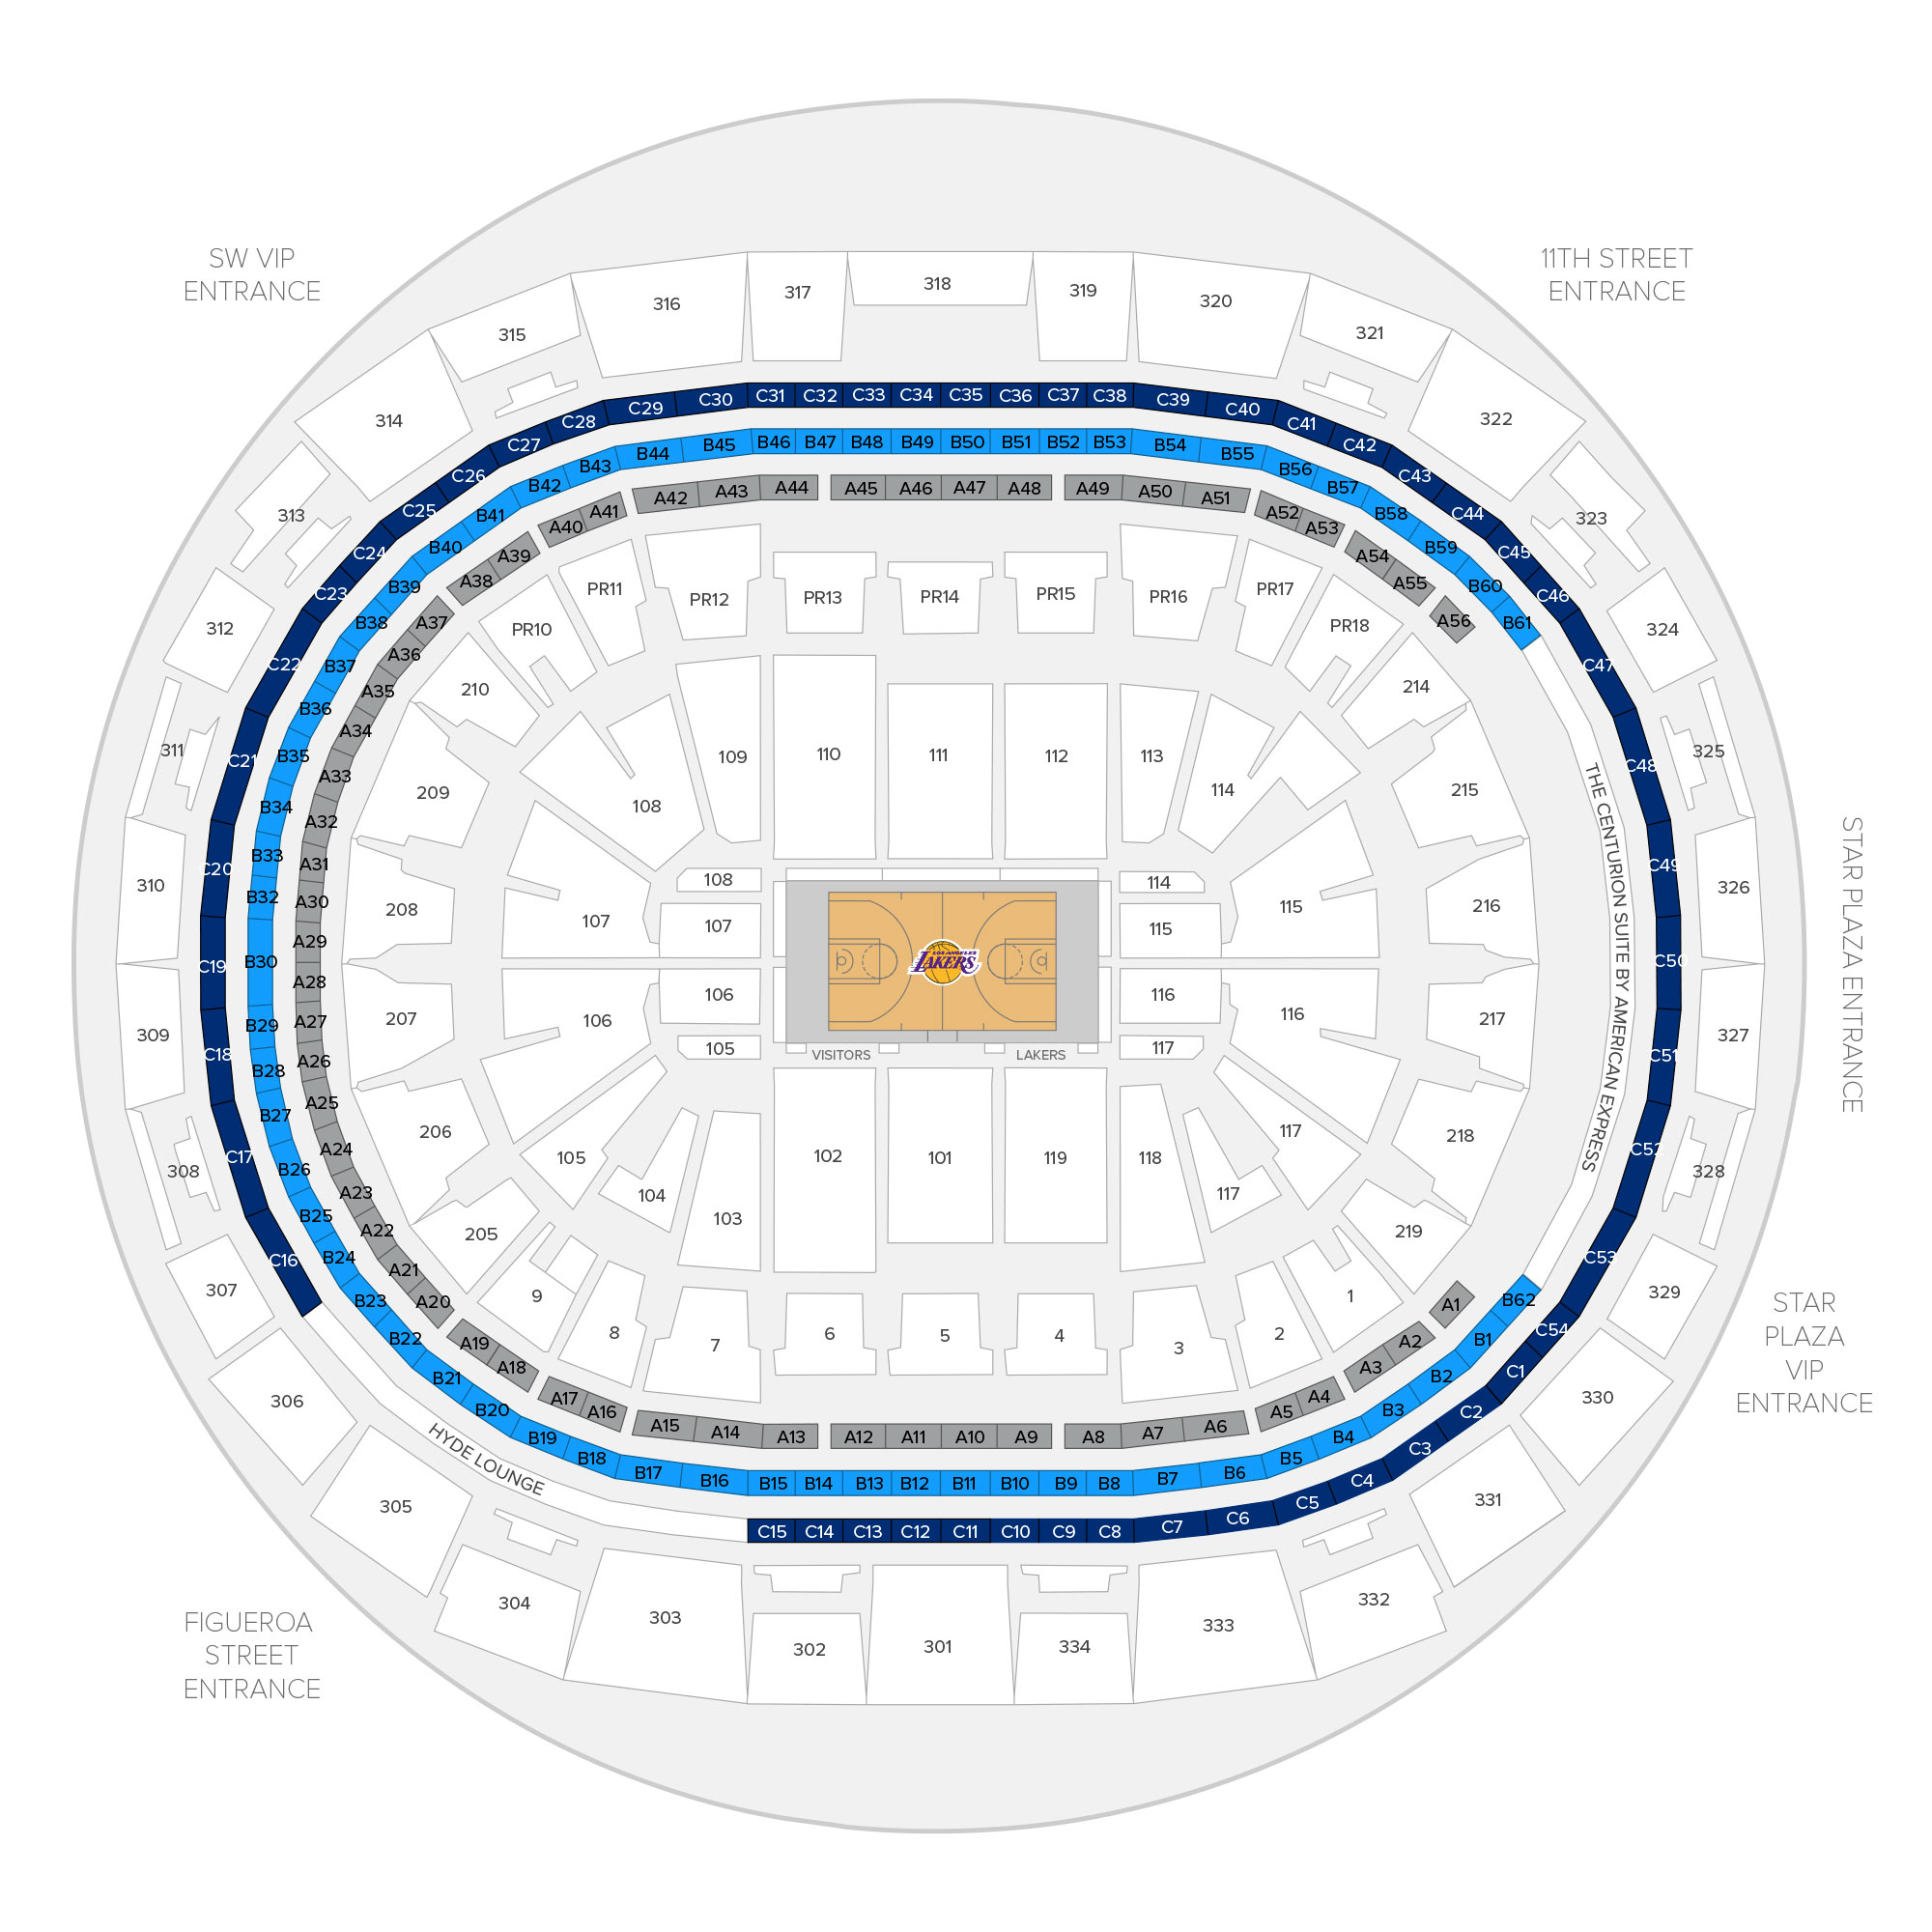 Incredible along with Beautiful allstate arena seating chart